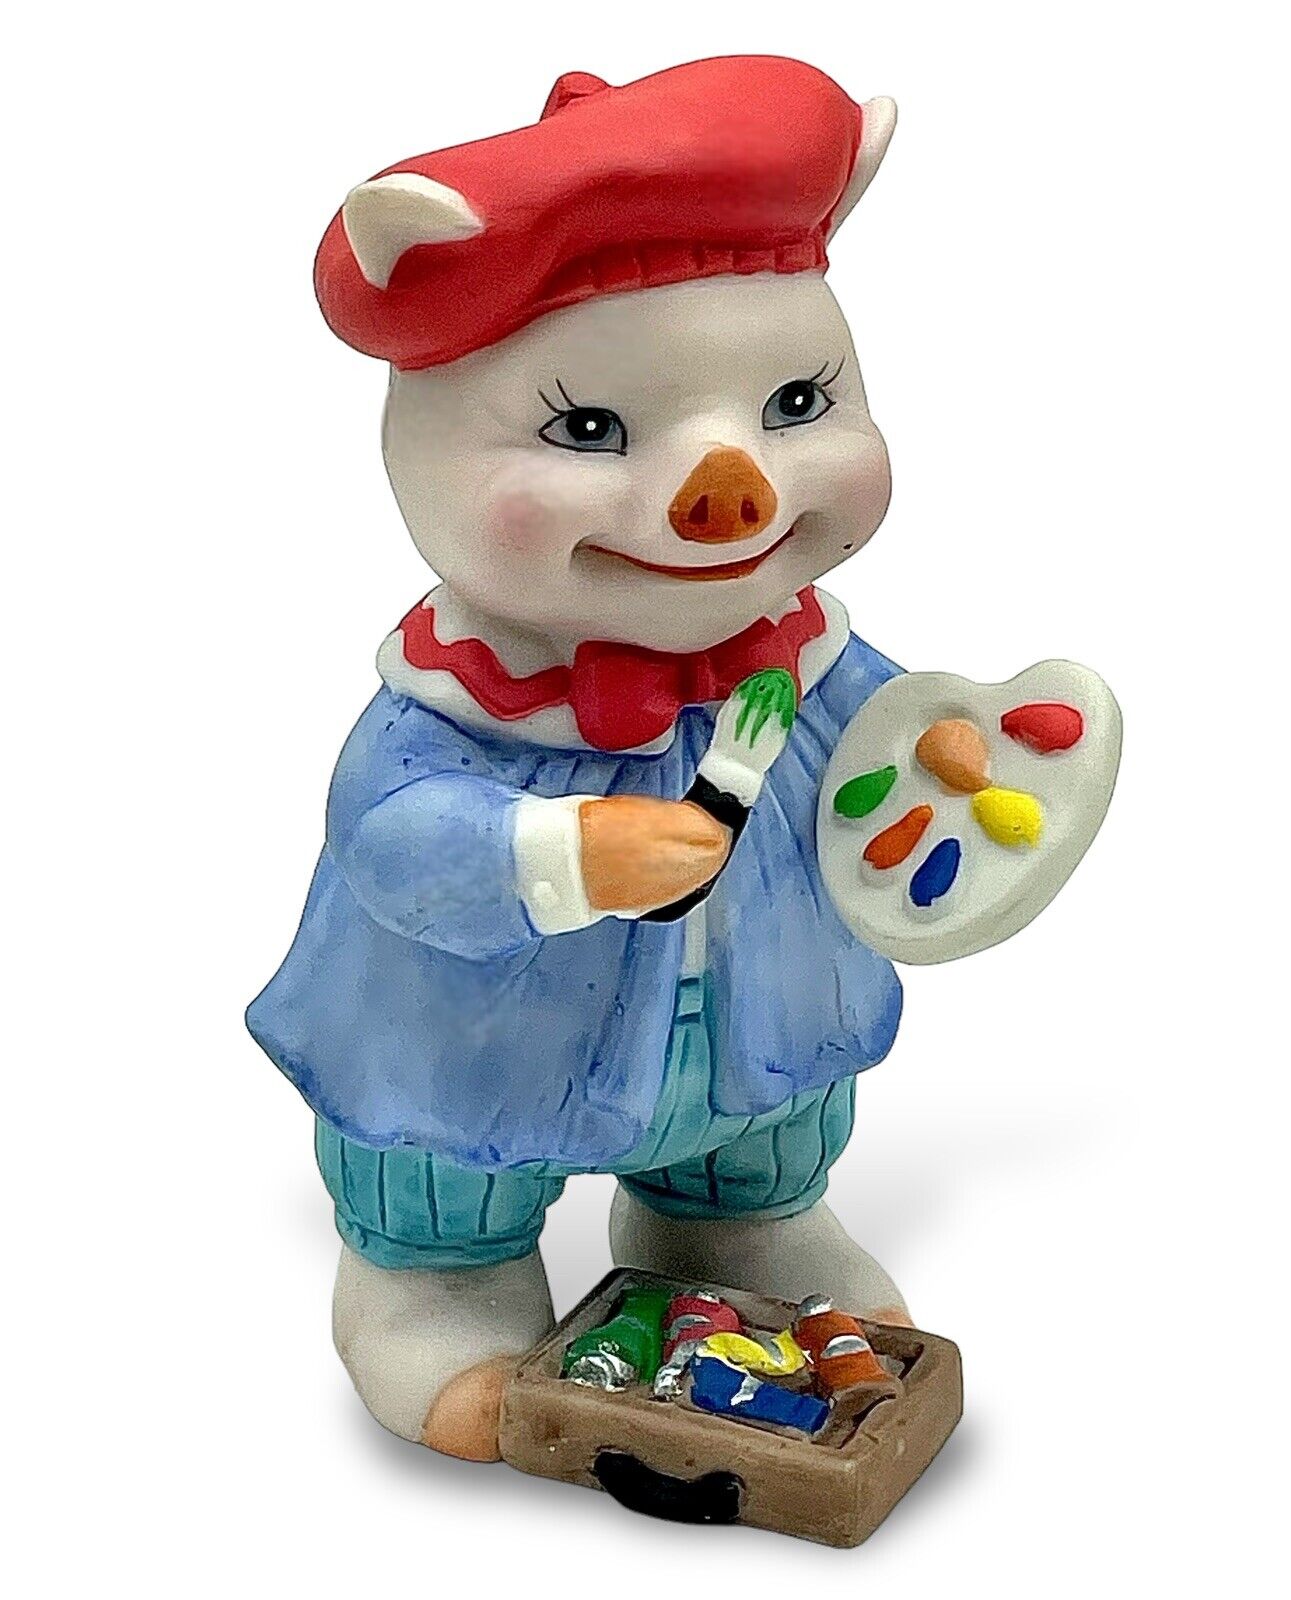 BC Bronson Collection ARTIST PIG FIGURINE Piggy Paints Brushes Red Beret 1995